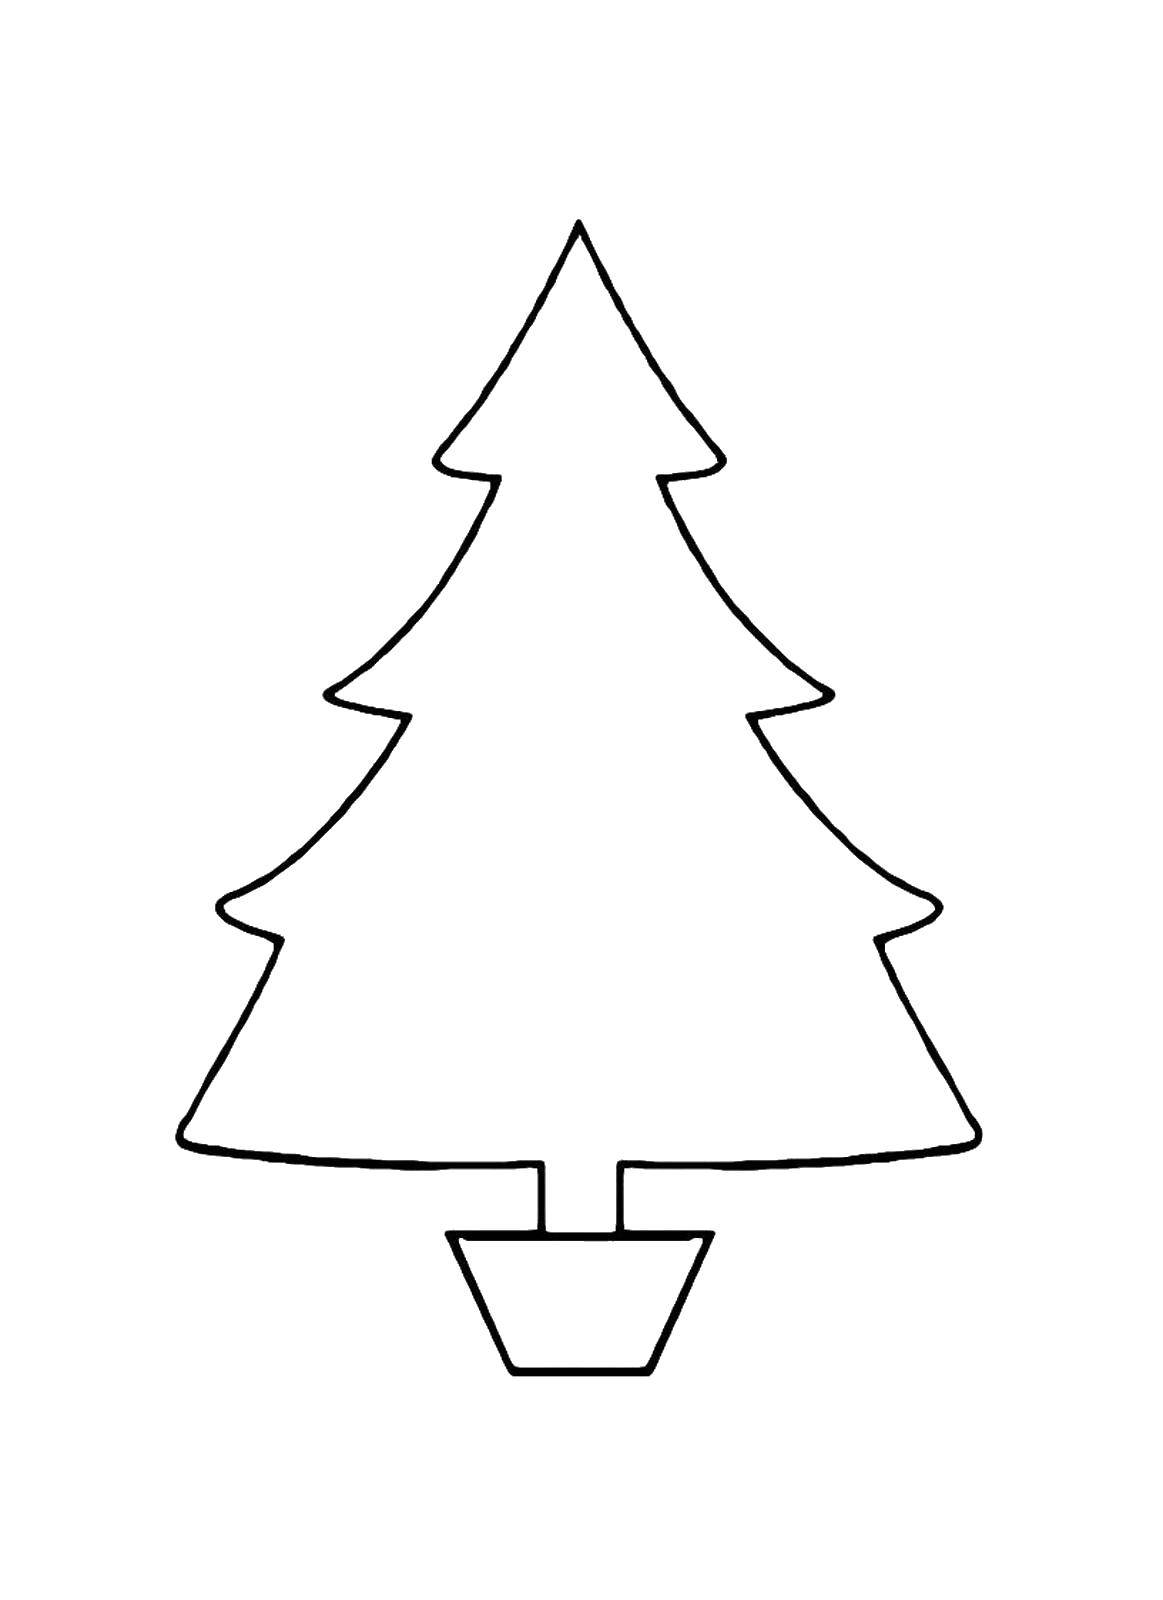 Coloring Herringbone in the new year. Category simple coloring. Tags:  New Year, tree, gifts, toys.